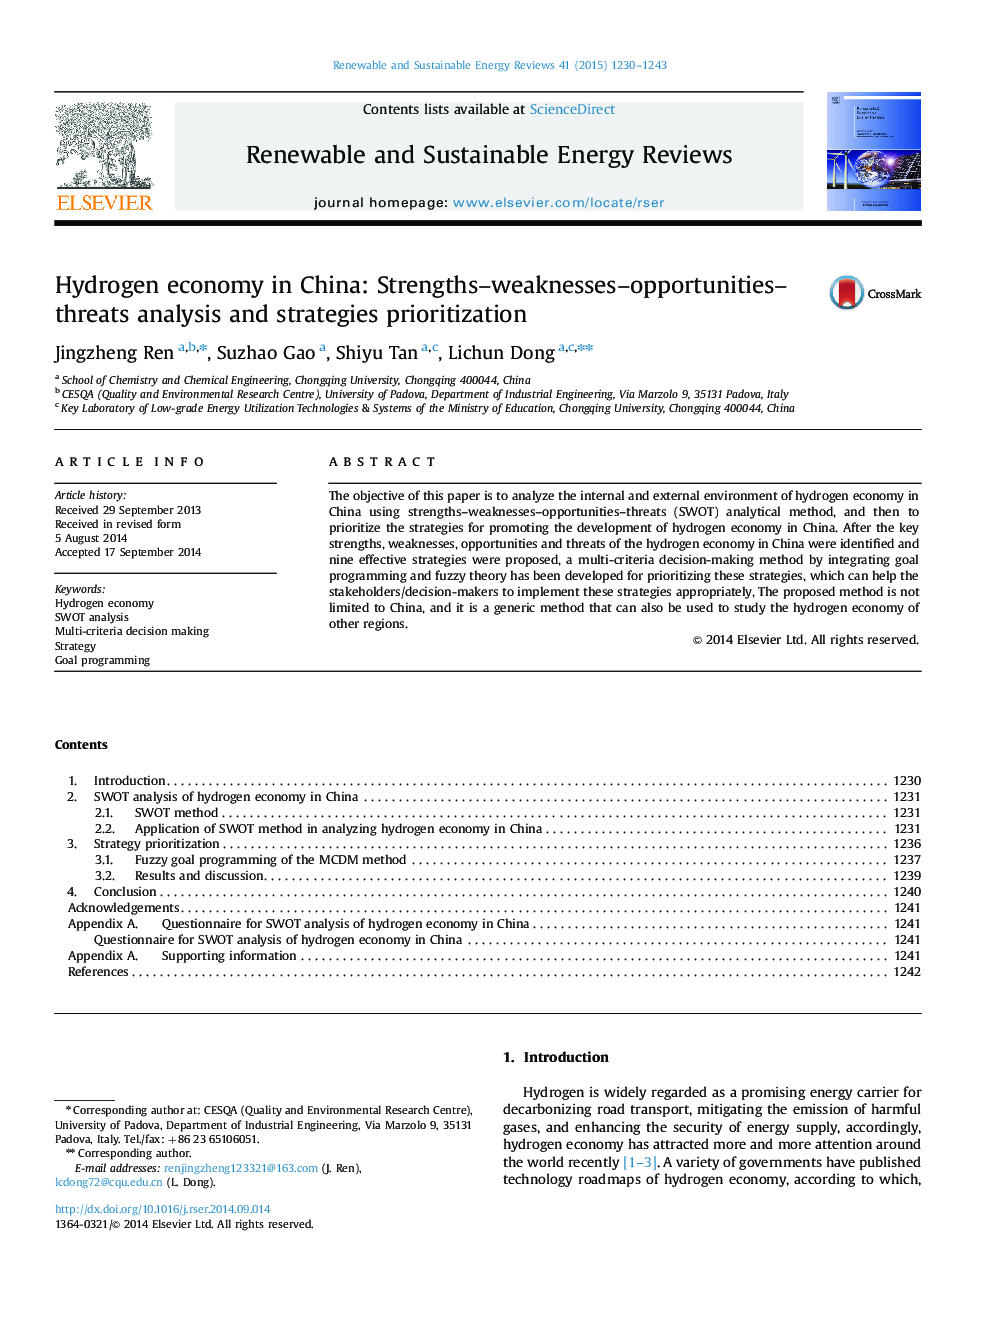 Hydrogen economy in China: Strengths-weaknesses-opportunities-threats analysis and strategies prioritization